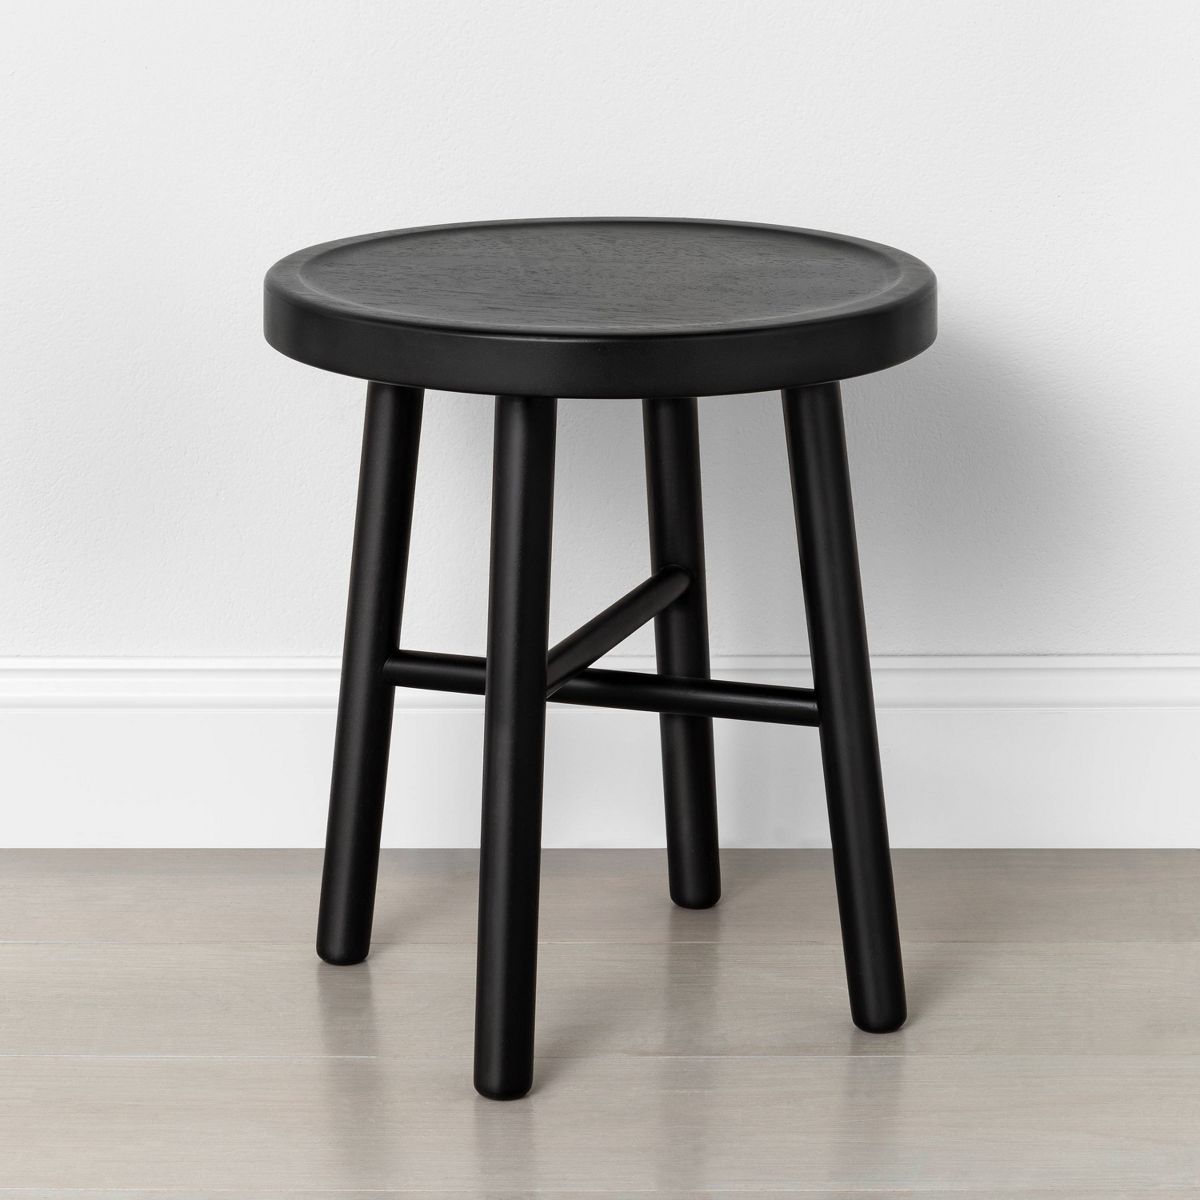 Shaker Accent Table or Stool - Black - Hearth & Hand™ with Magnolia | Target